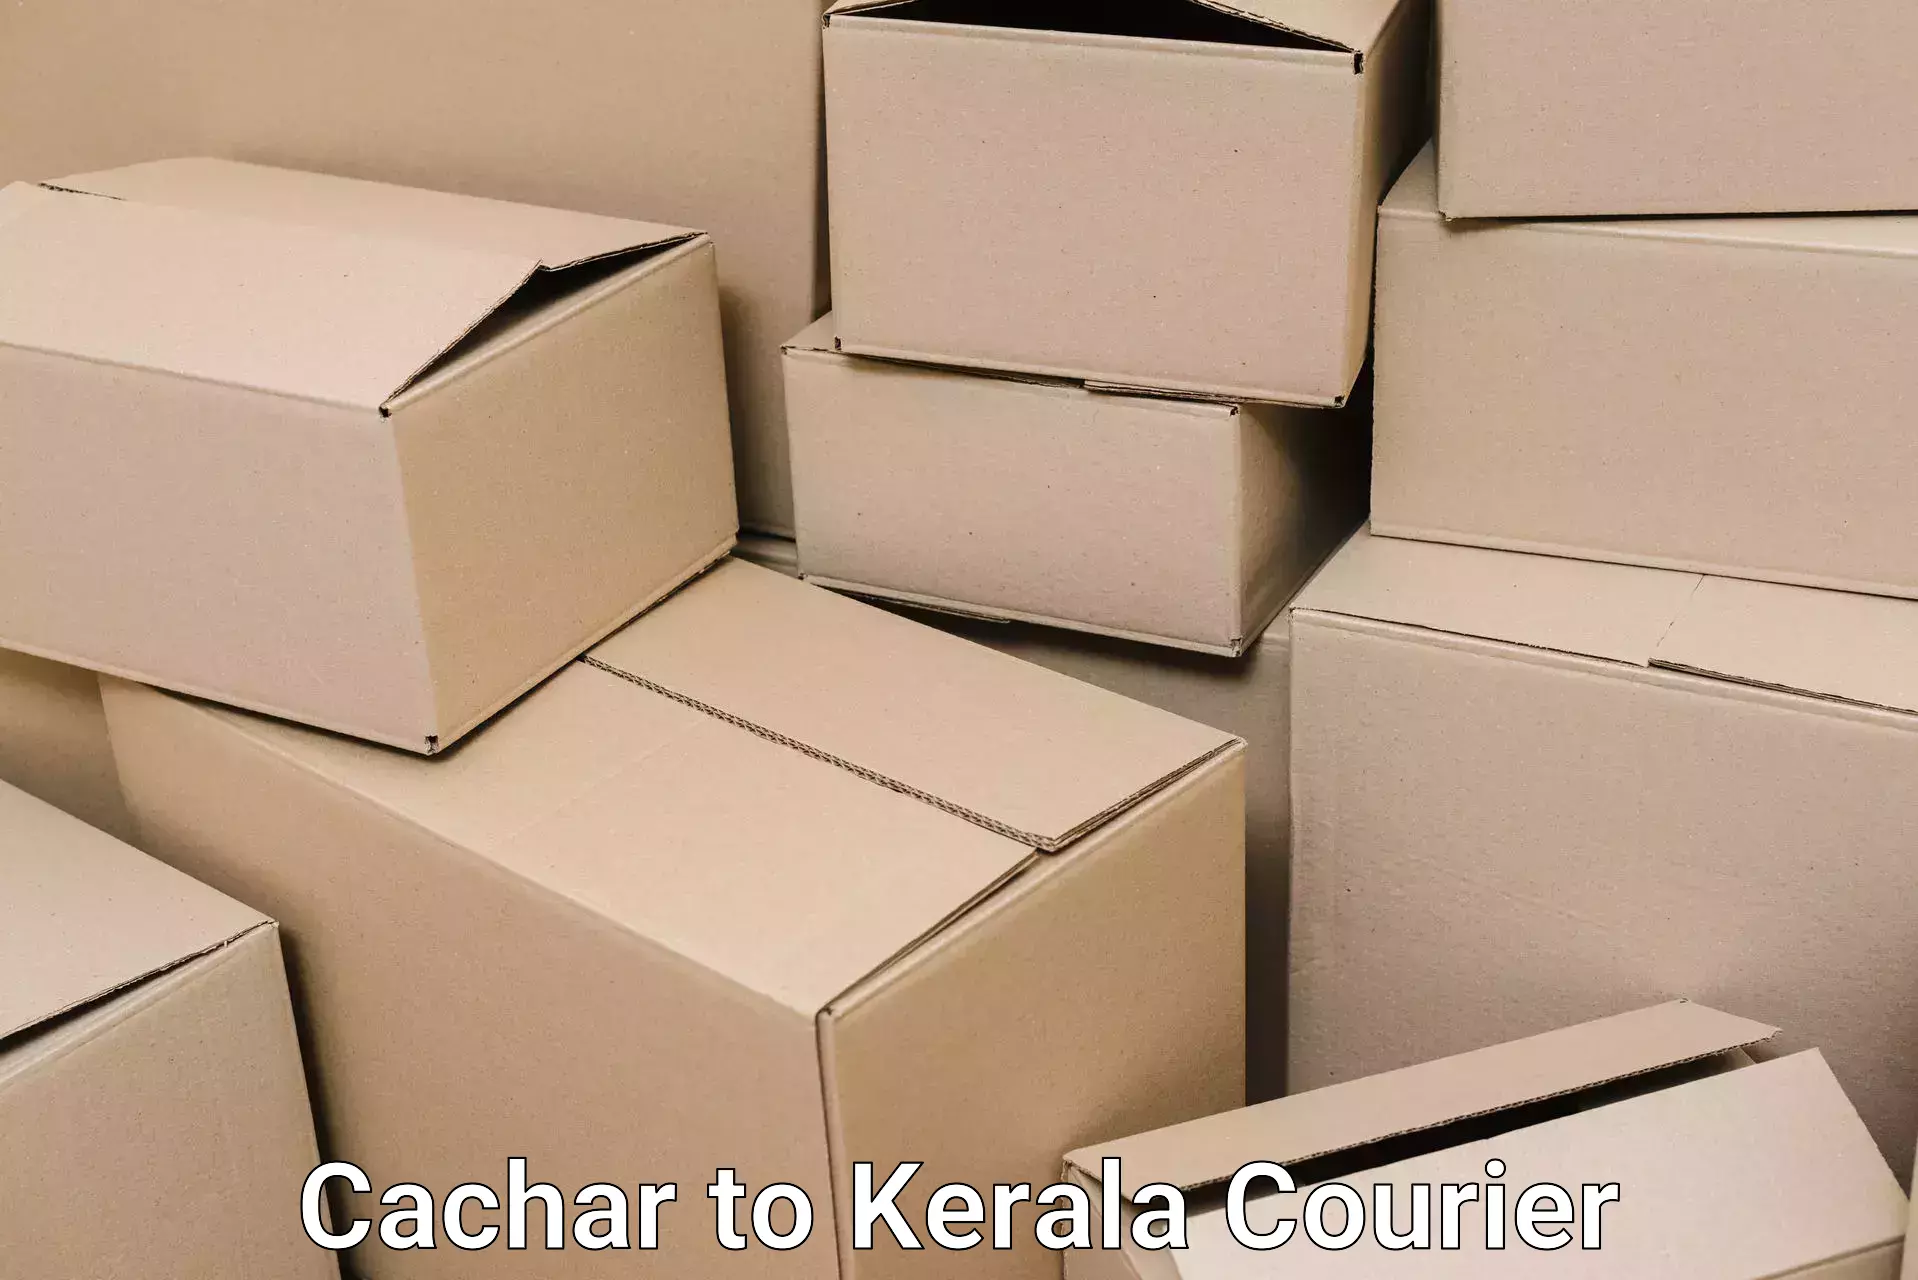 Home moving experts Cachar to Kochi